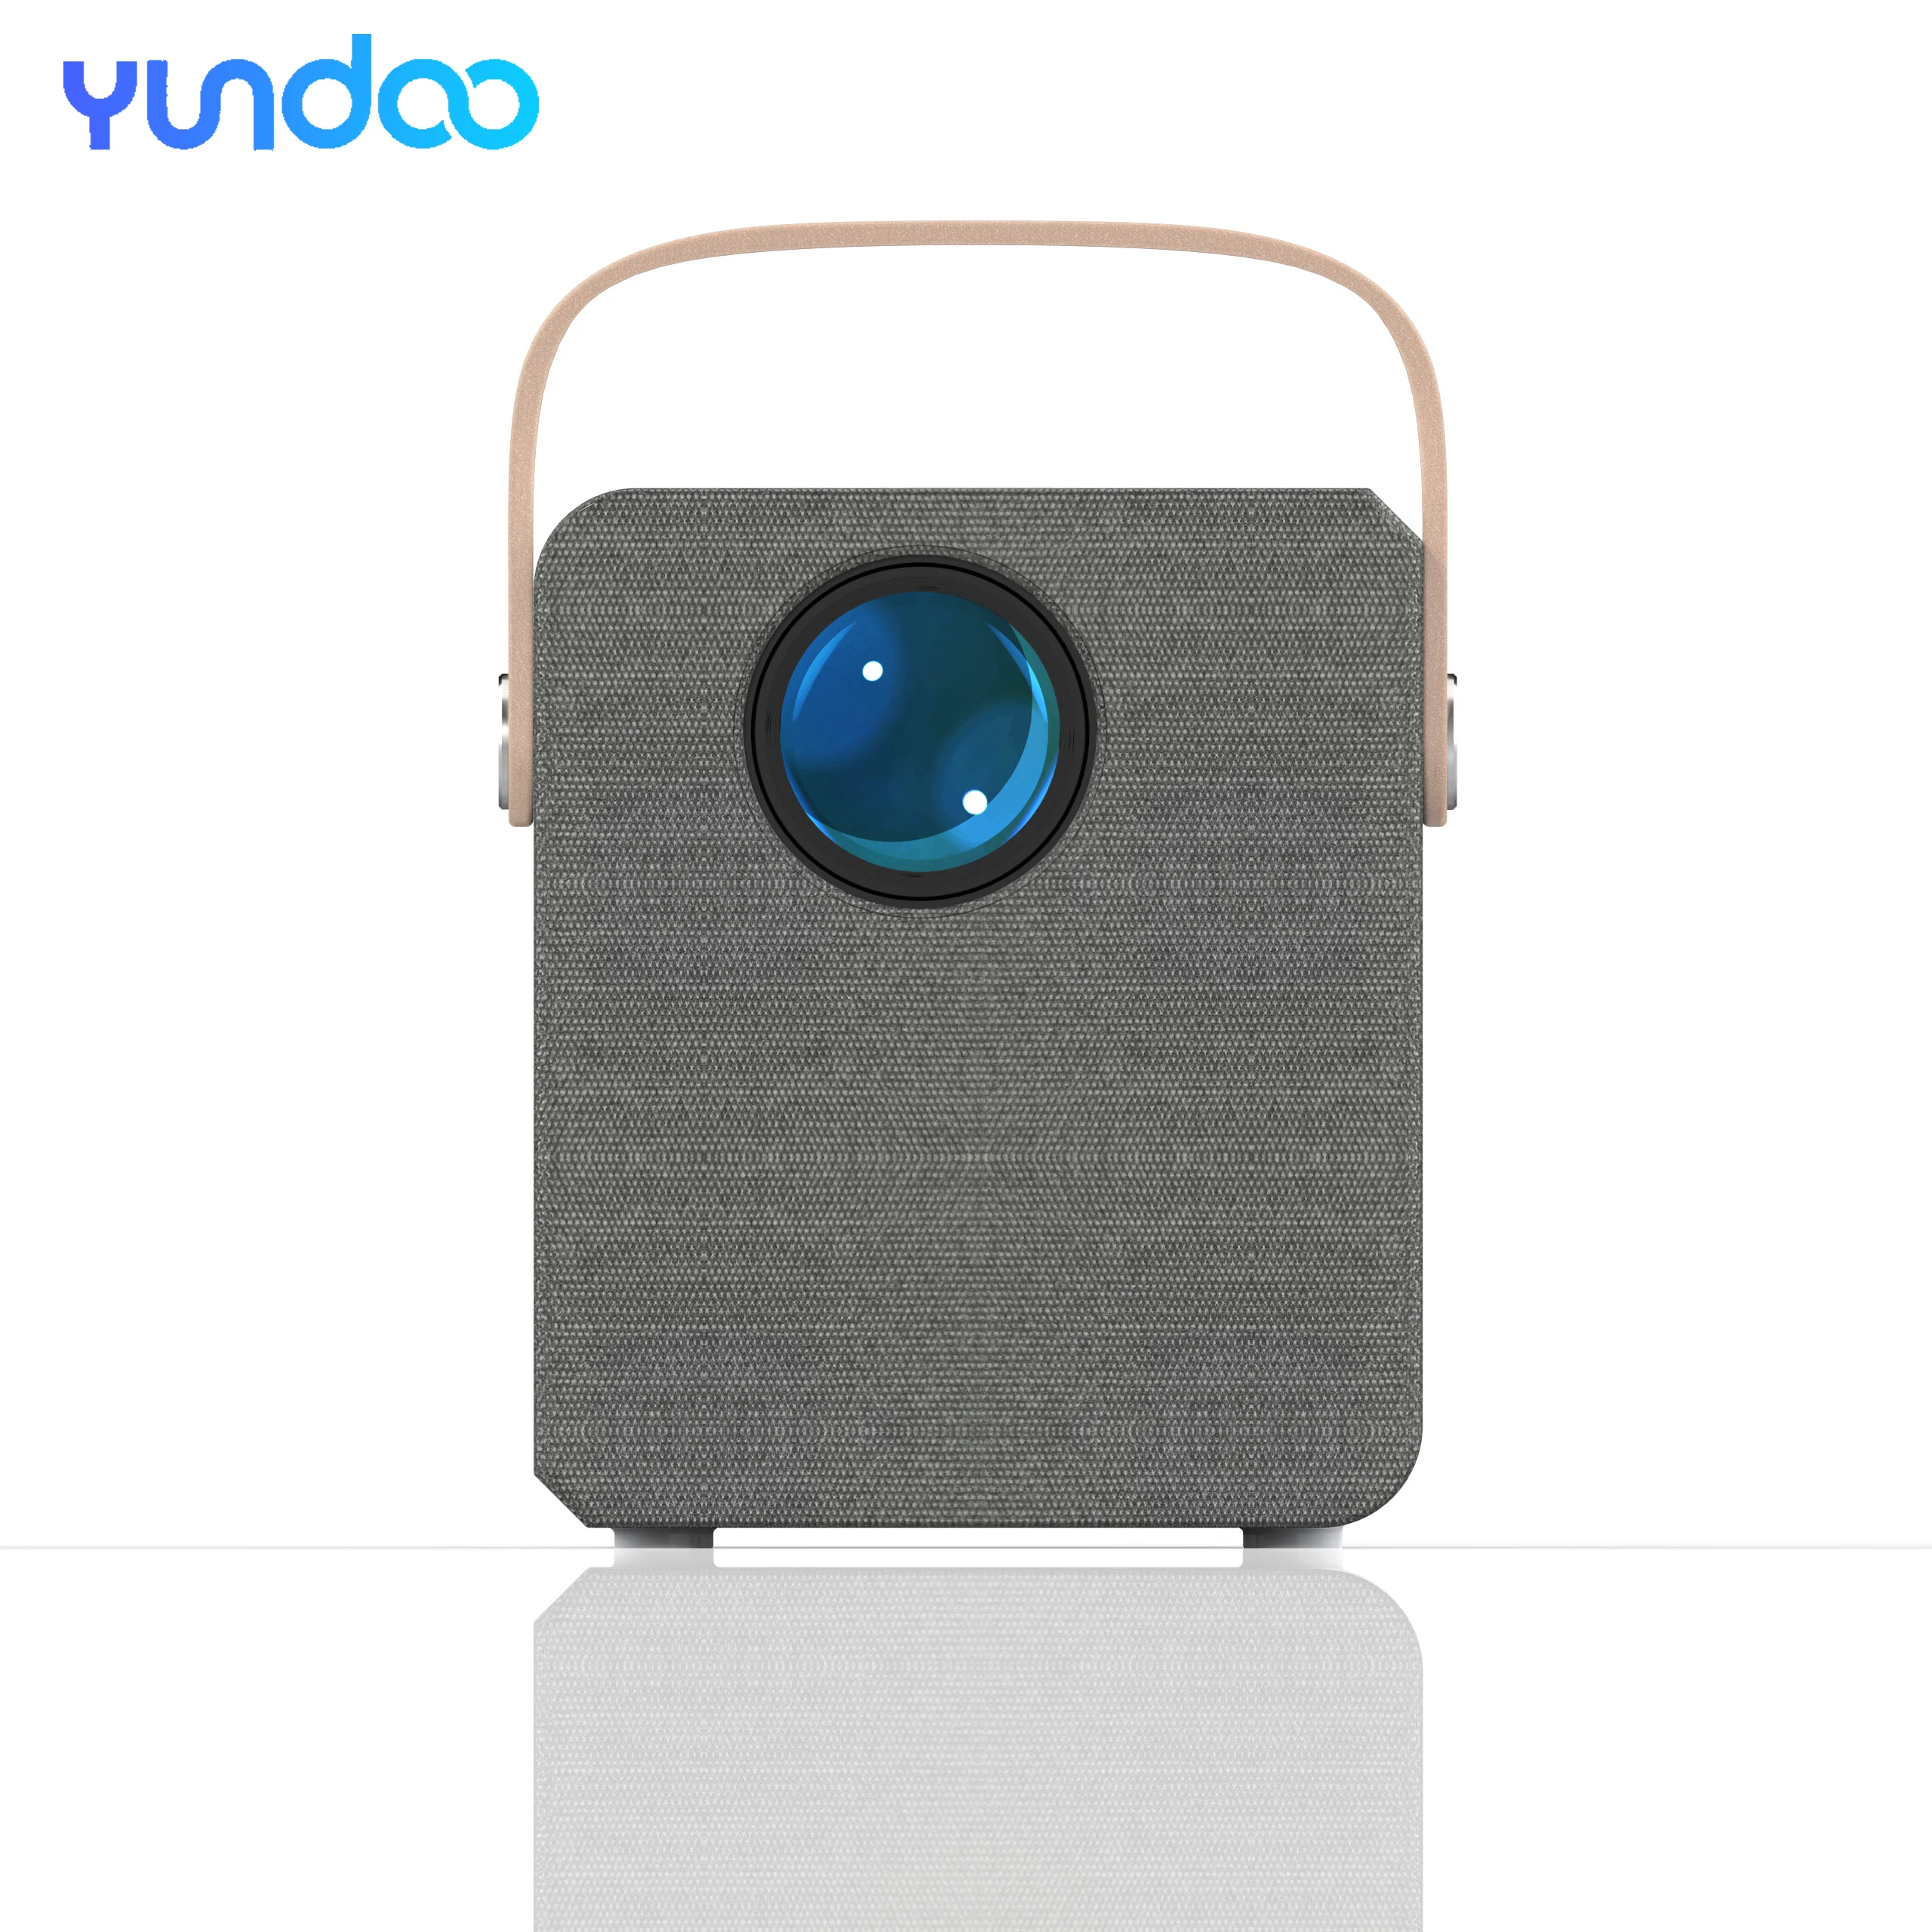 

YUNDOO Portable CY303 Cheap Mini Projector For Home Kids Smart Pocket Cinema Video Proyector CY-303 6000Lumens with 720P Beamer